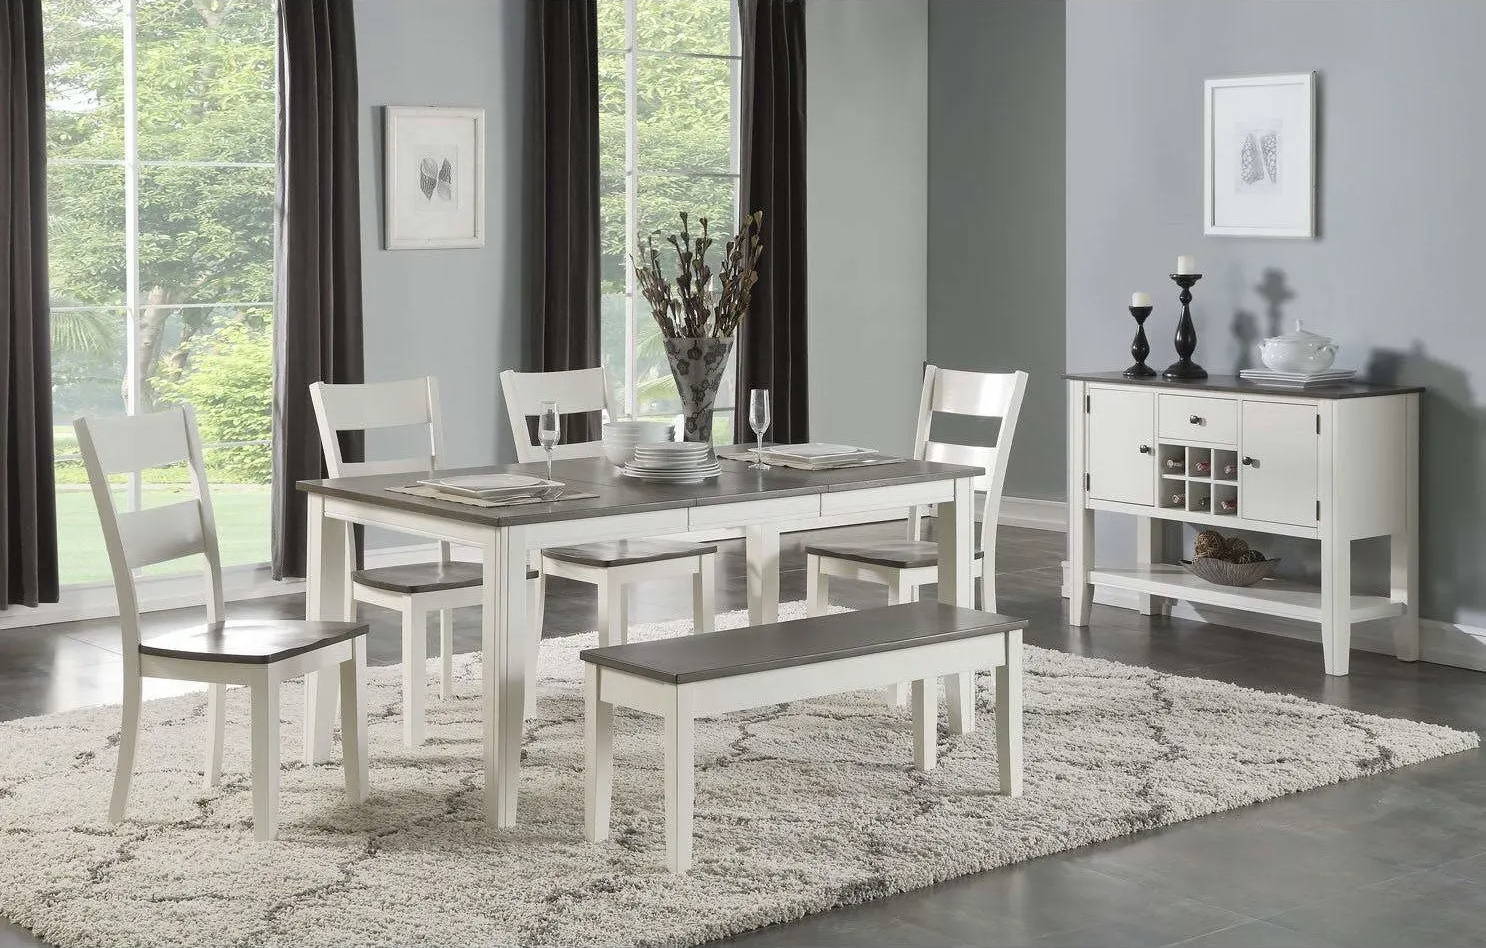 The Athens Dining Set Product Review